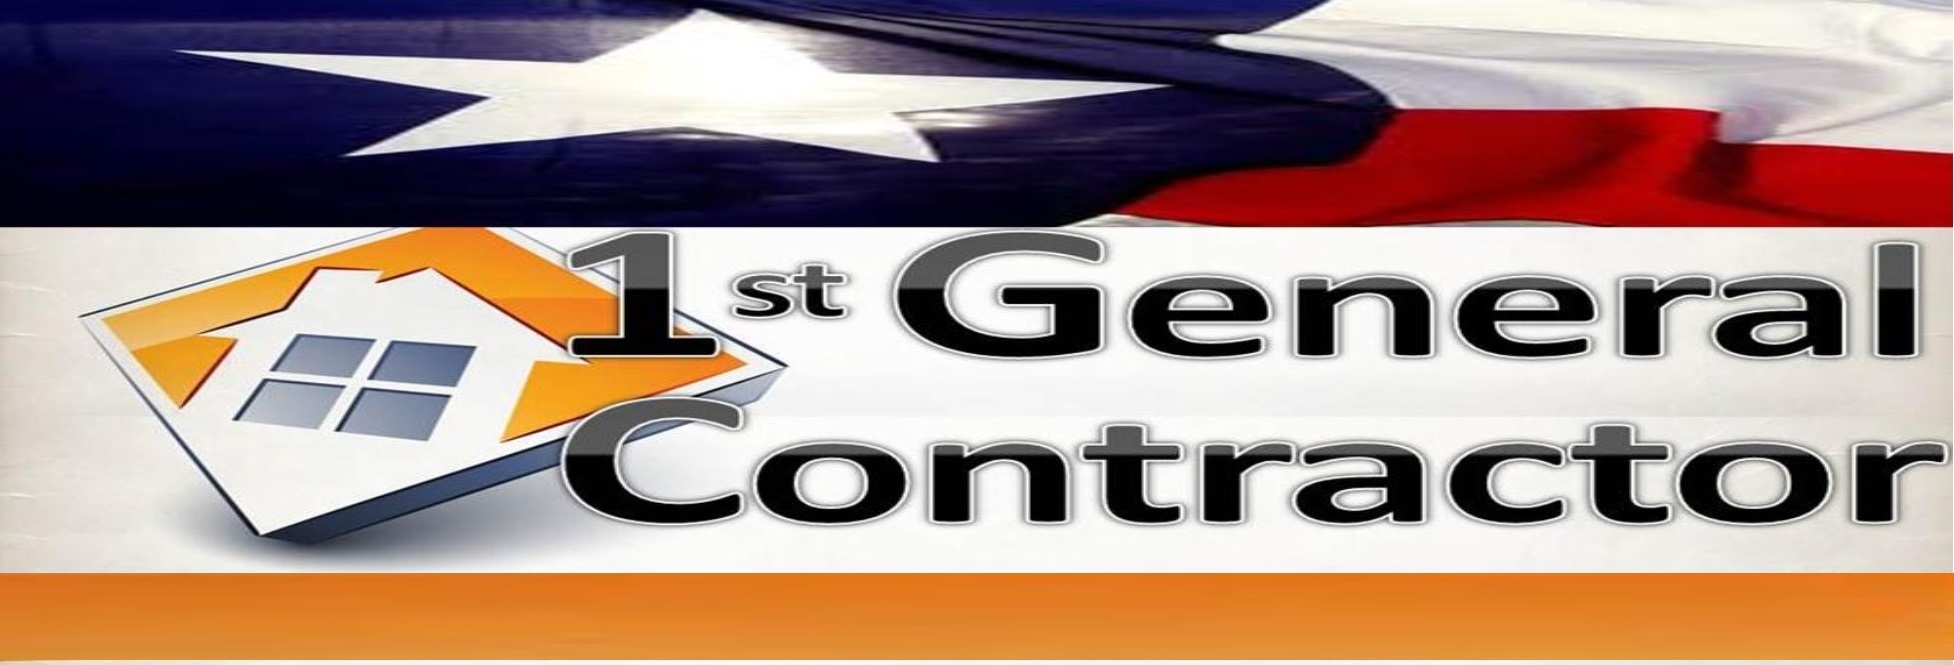 1st General Contractor's Logo